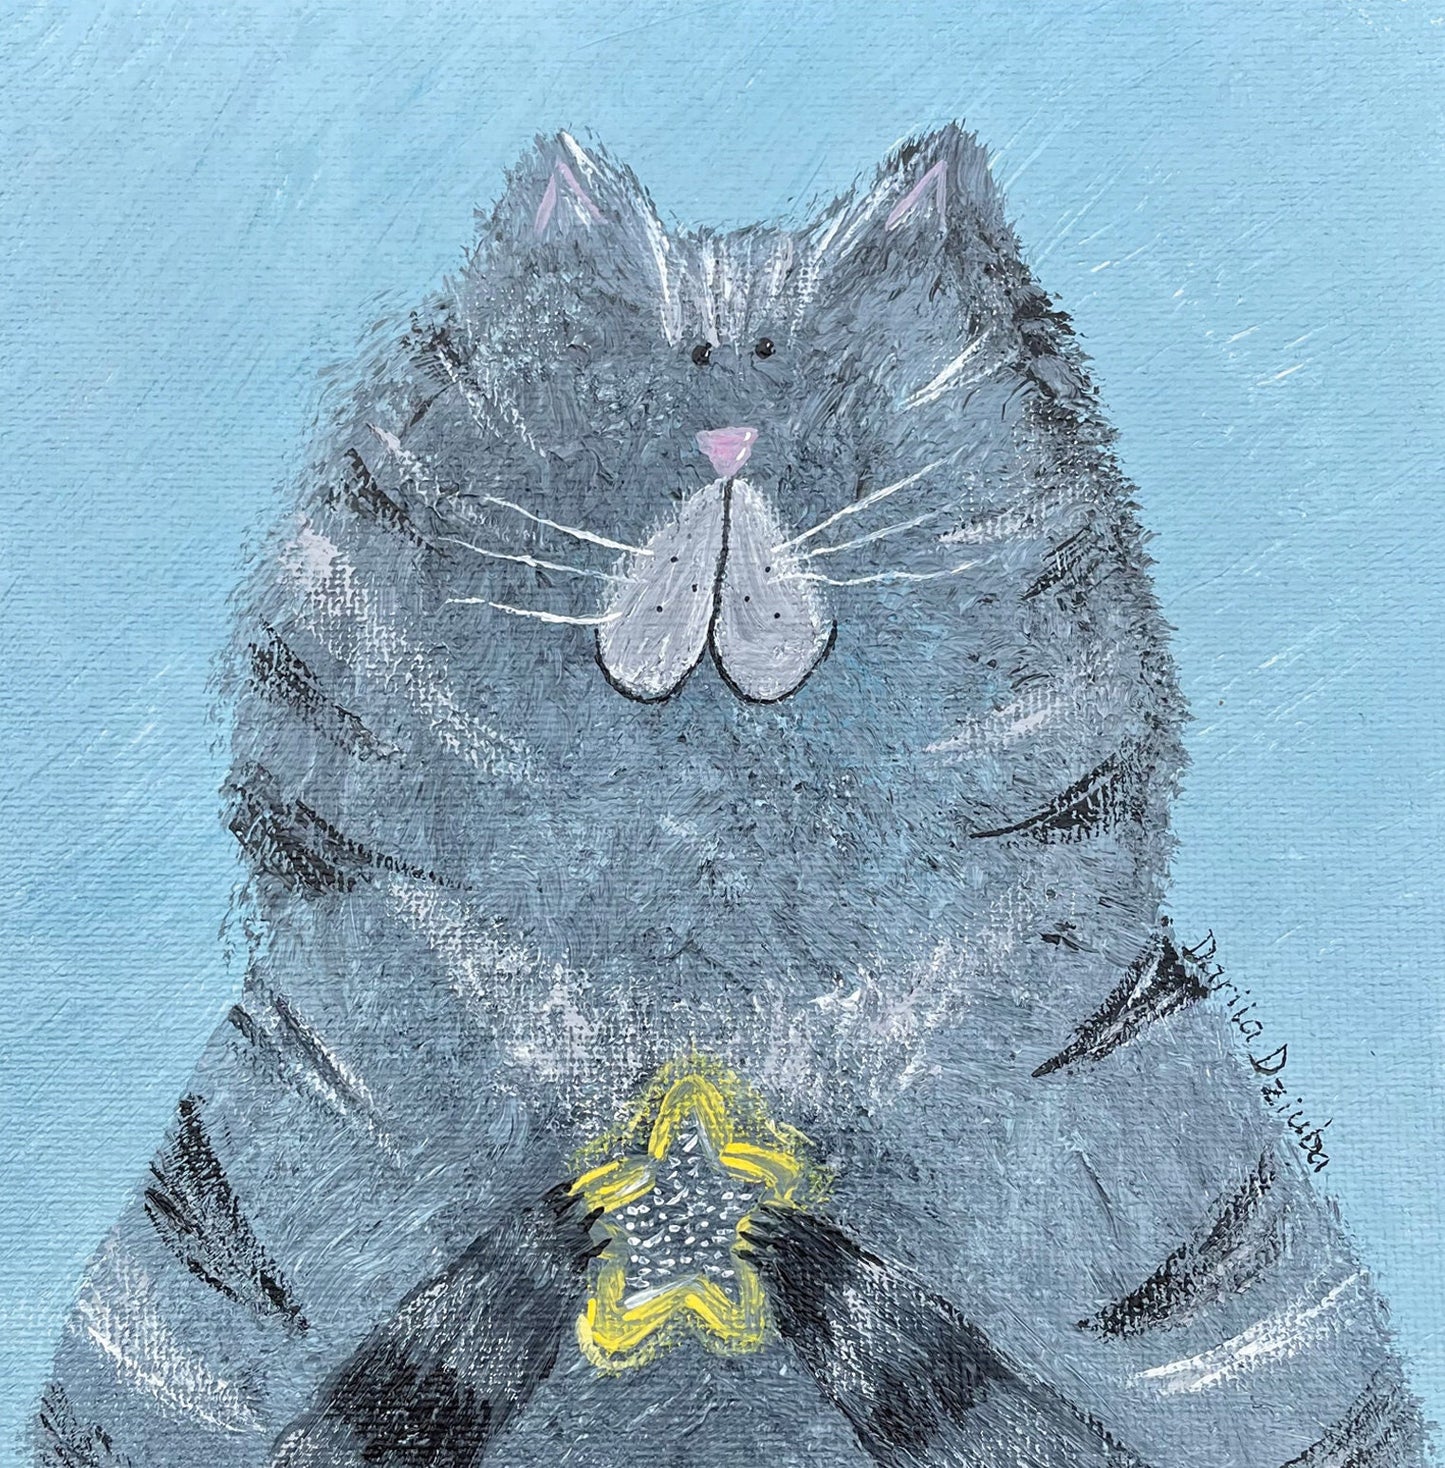 Kitty with star: Greeting card